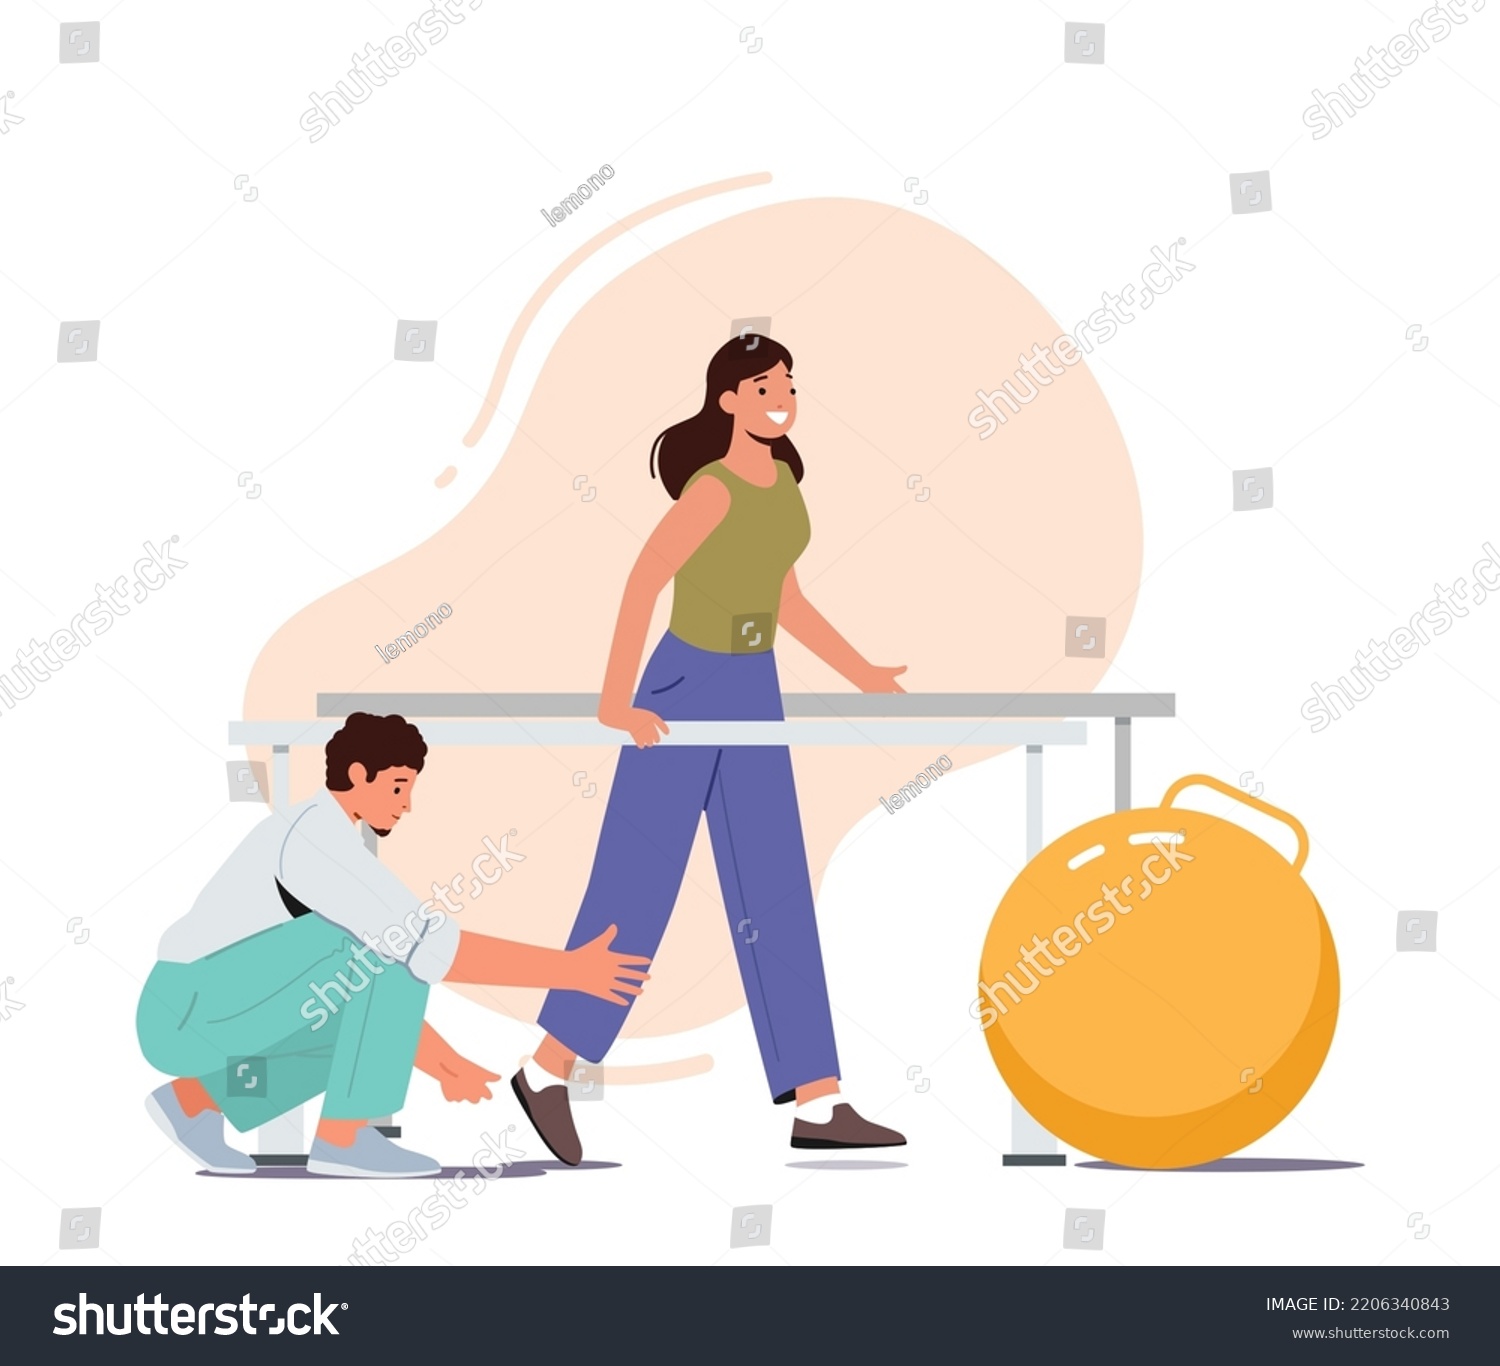 SVG of Physical Rehabilitation Concept. Doctor Helps Patient To Walk After Injury Or Medical Operation During Physio Therapy. Treatment For Character With Disabilities. Cartoon People Vector Illustration svg